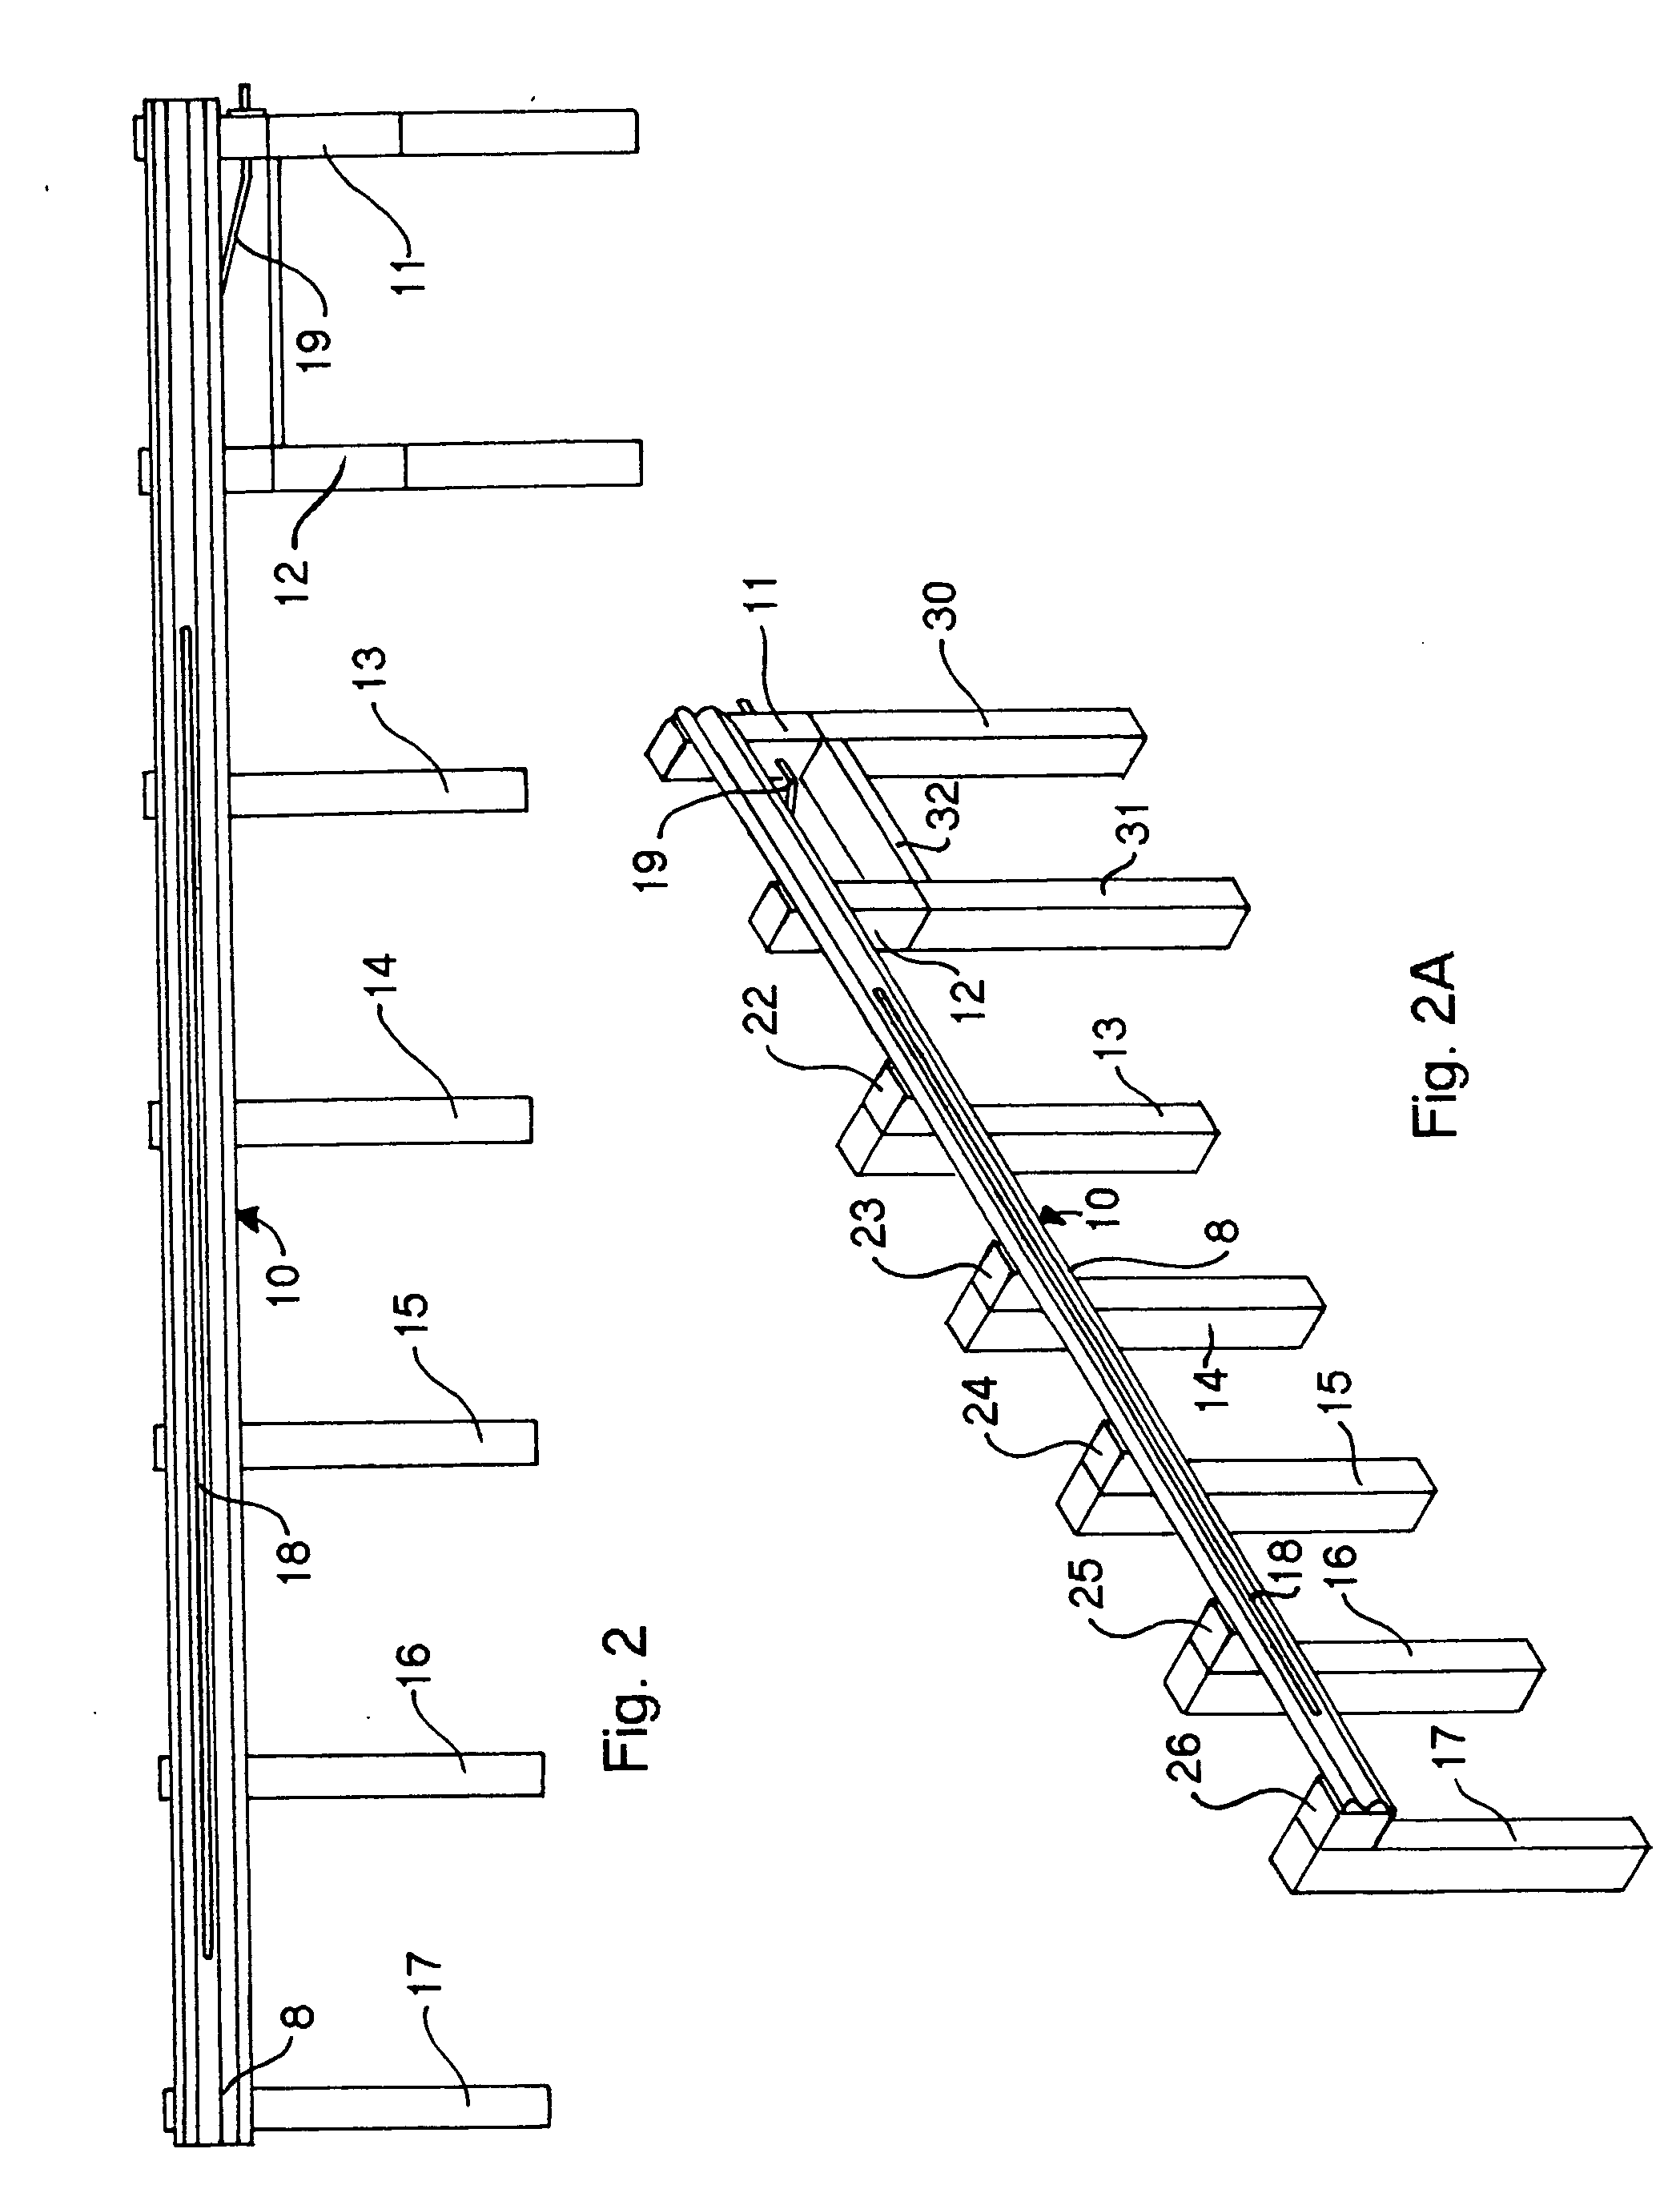 Integrated cable guardrail system